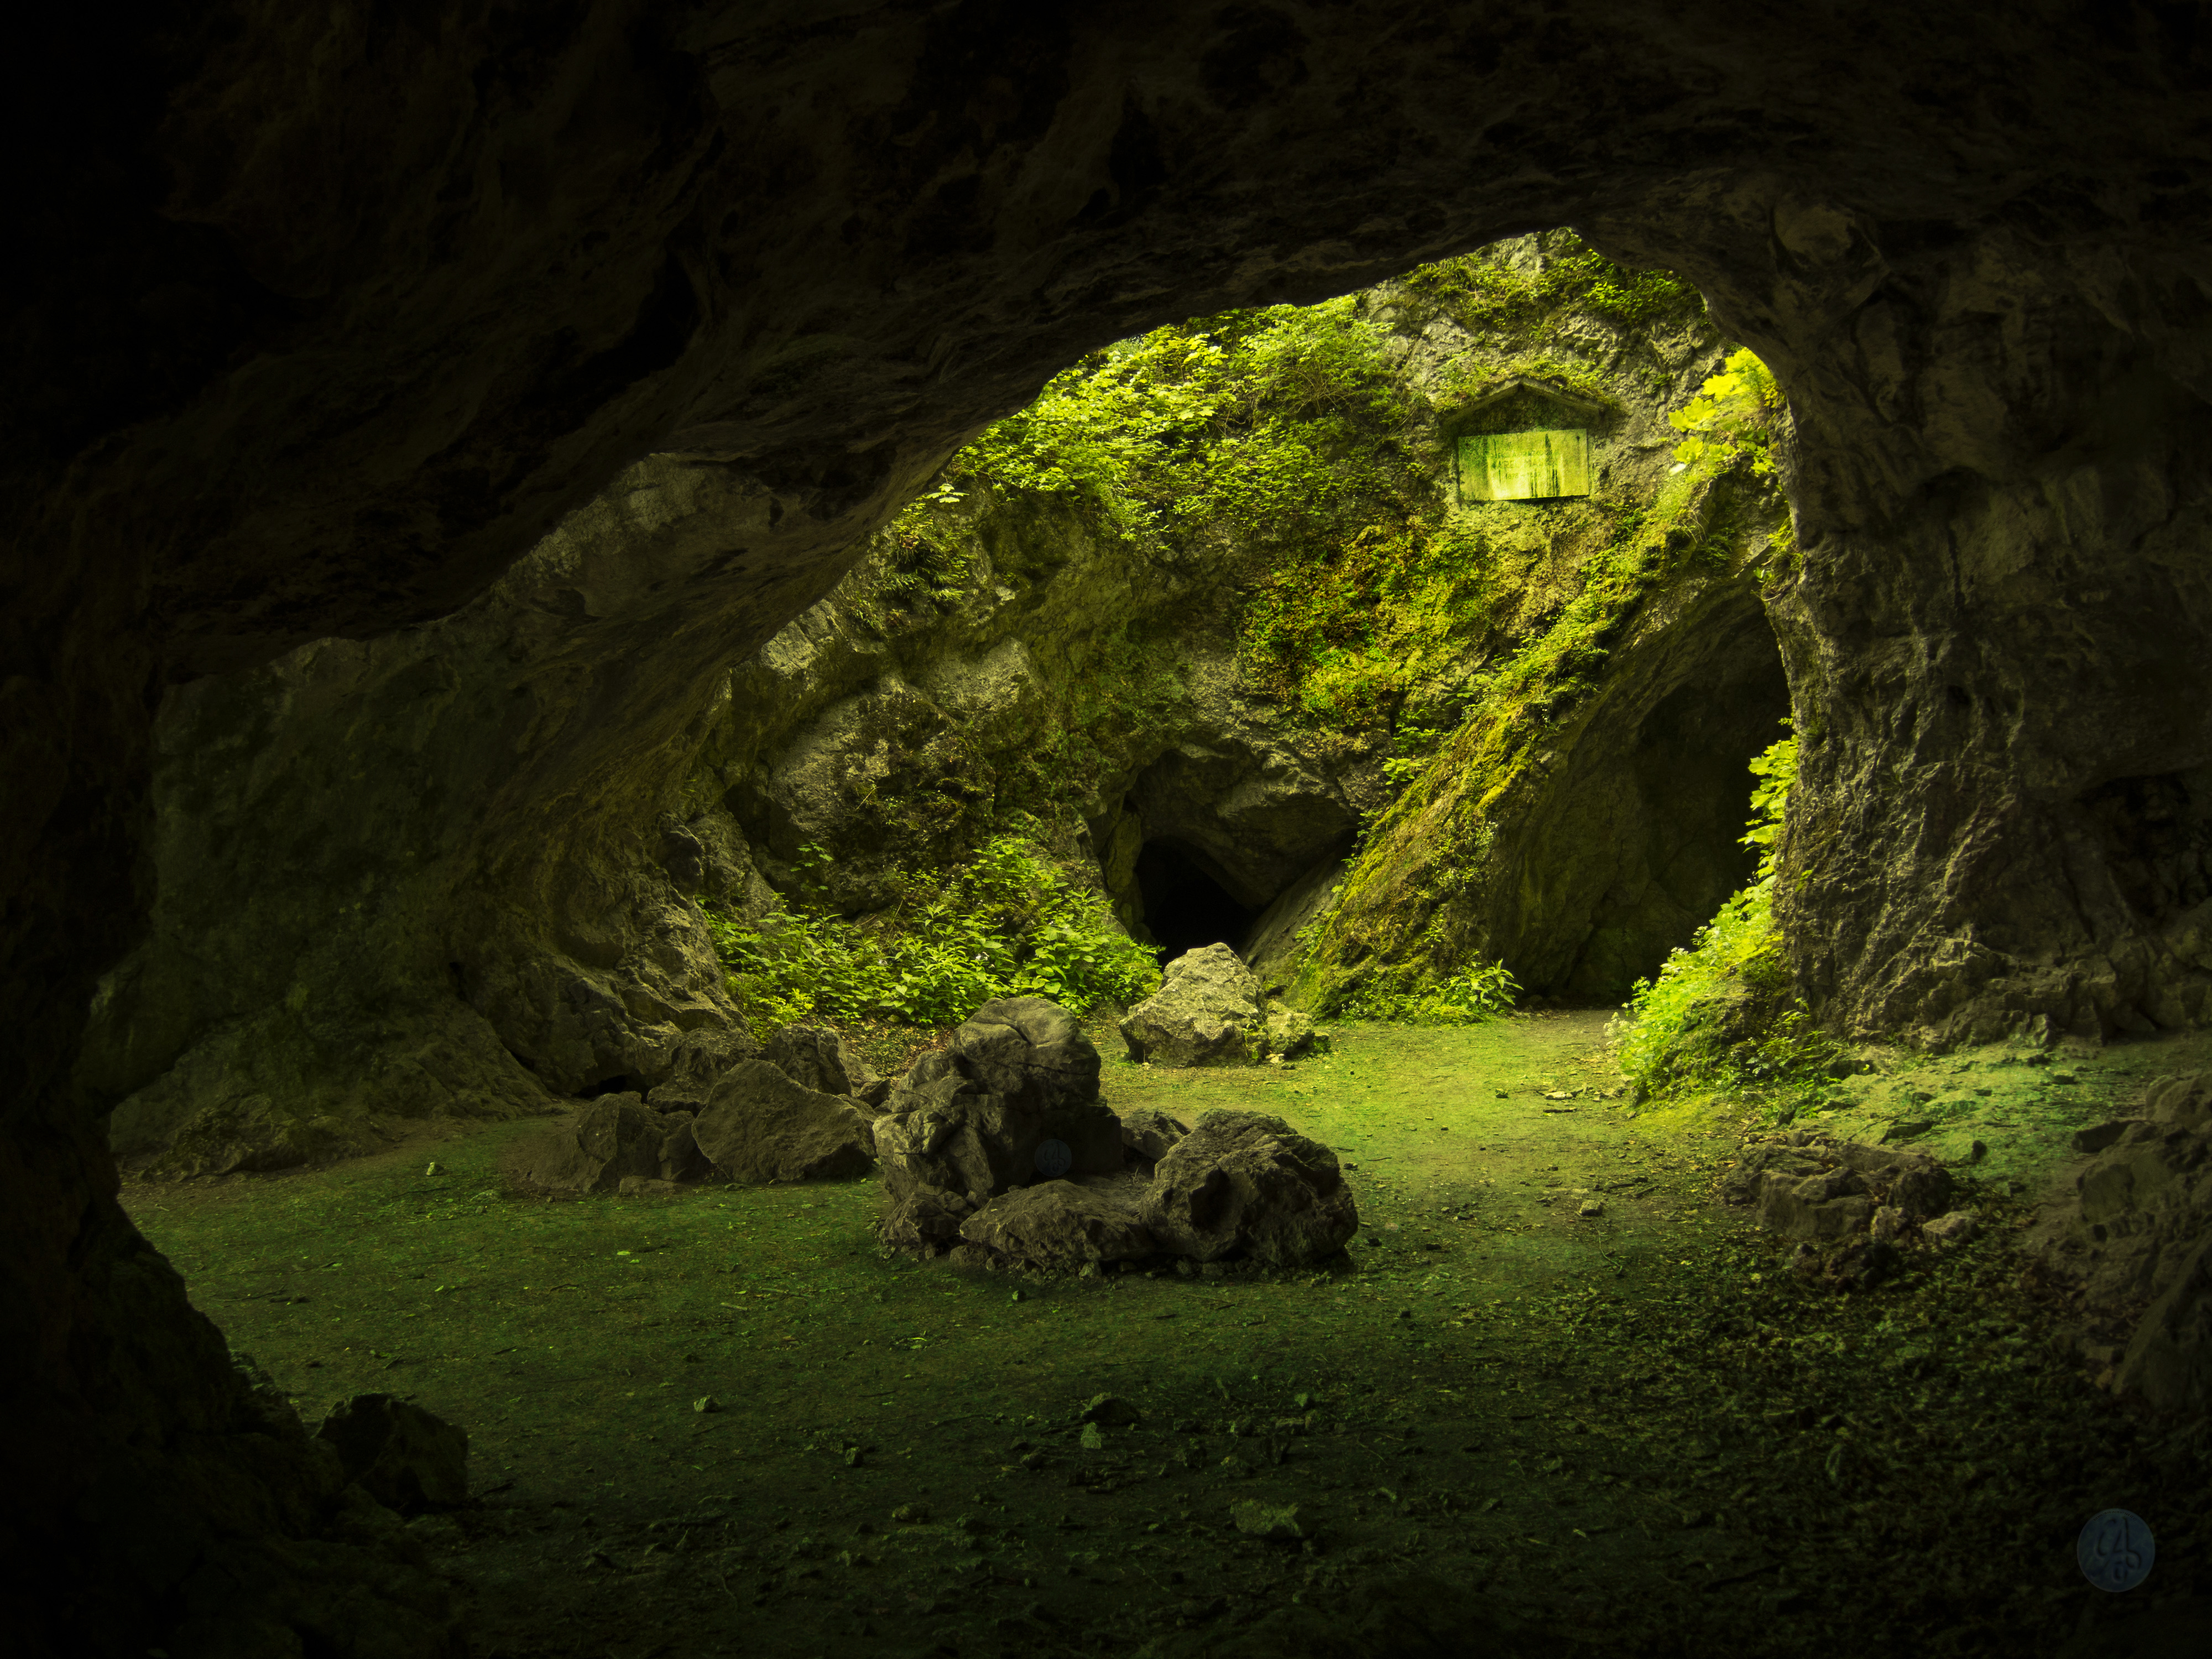 Cave Wallpaper Full Hd Free Download By Aj8 Acro On Deviantart Riset